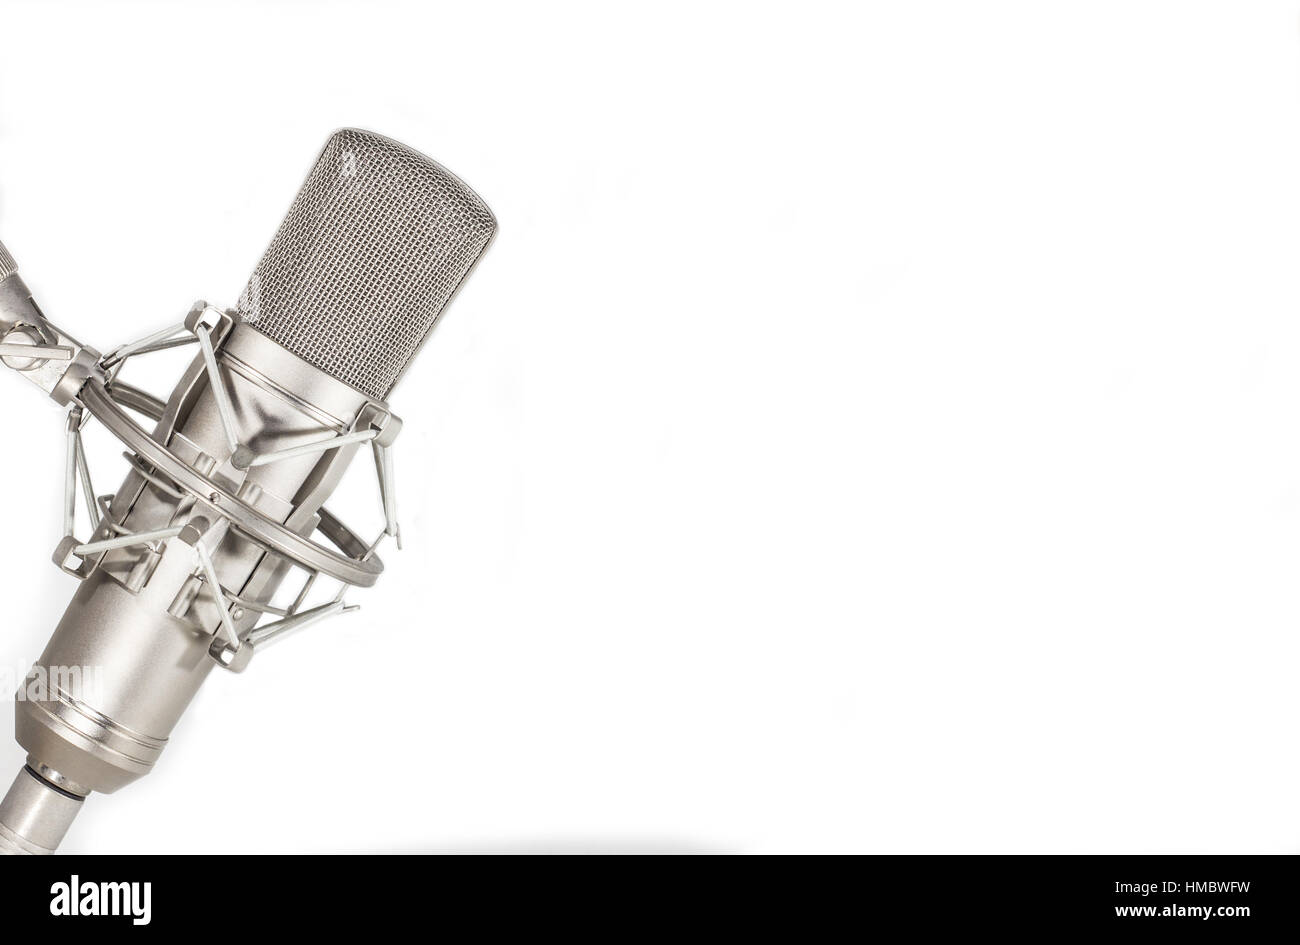 Isolated Condenser studio microphone on white background Stock Photo